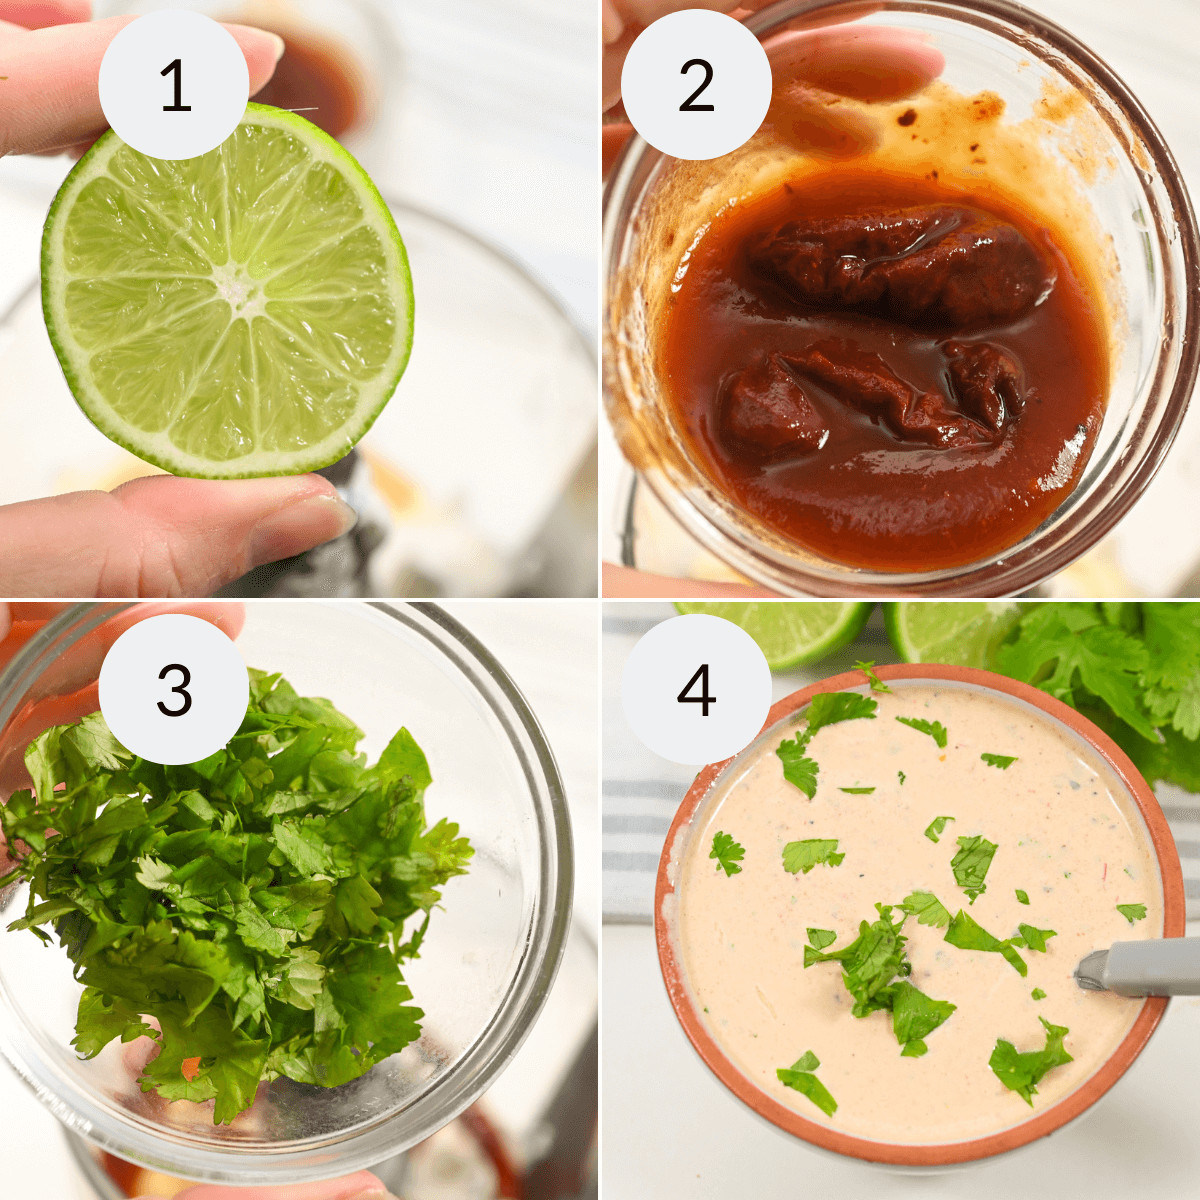 Four-step preparation process showcasing ingredients for a Baja tacos recipe: 1) a hand holding a slice of lime, 2) a bowl of sauce with chipotle peppers, 3) fresh